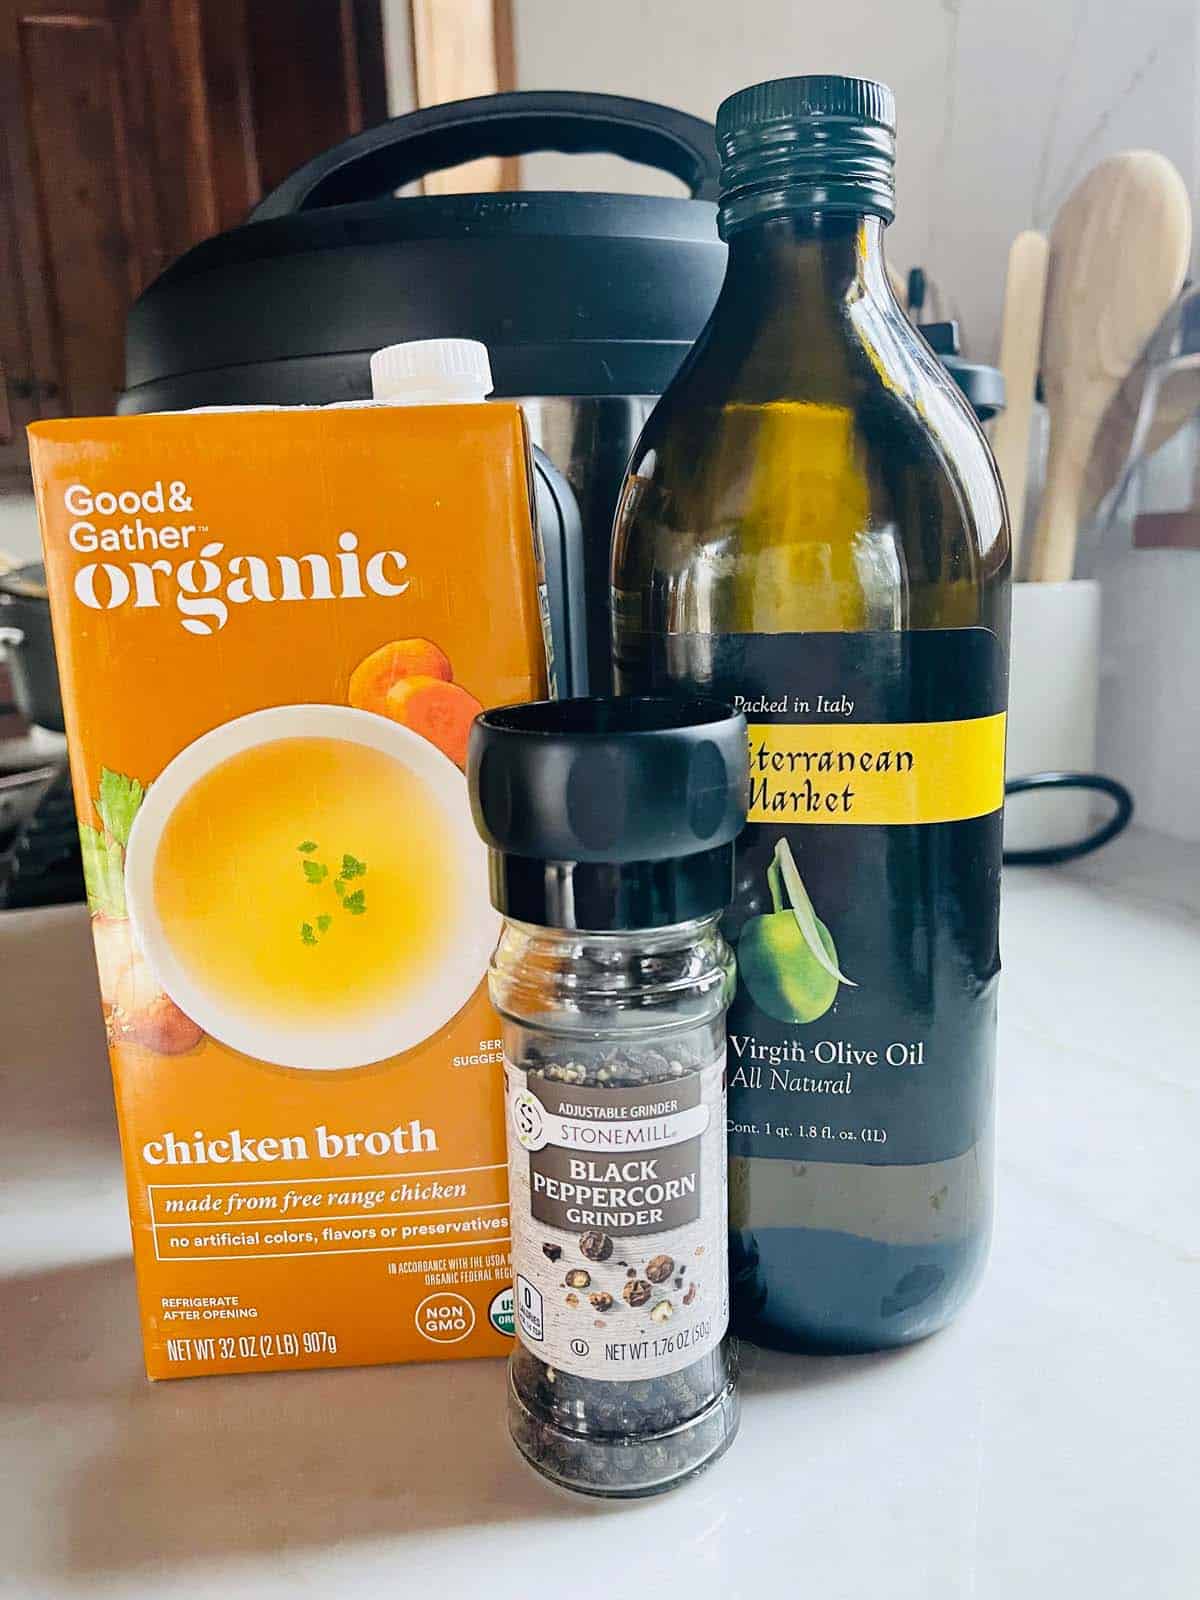 Ingredients for cooking chicken to freeze sitting in front of an Instant Pot; including chicken broth, olive oil, and pepper.